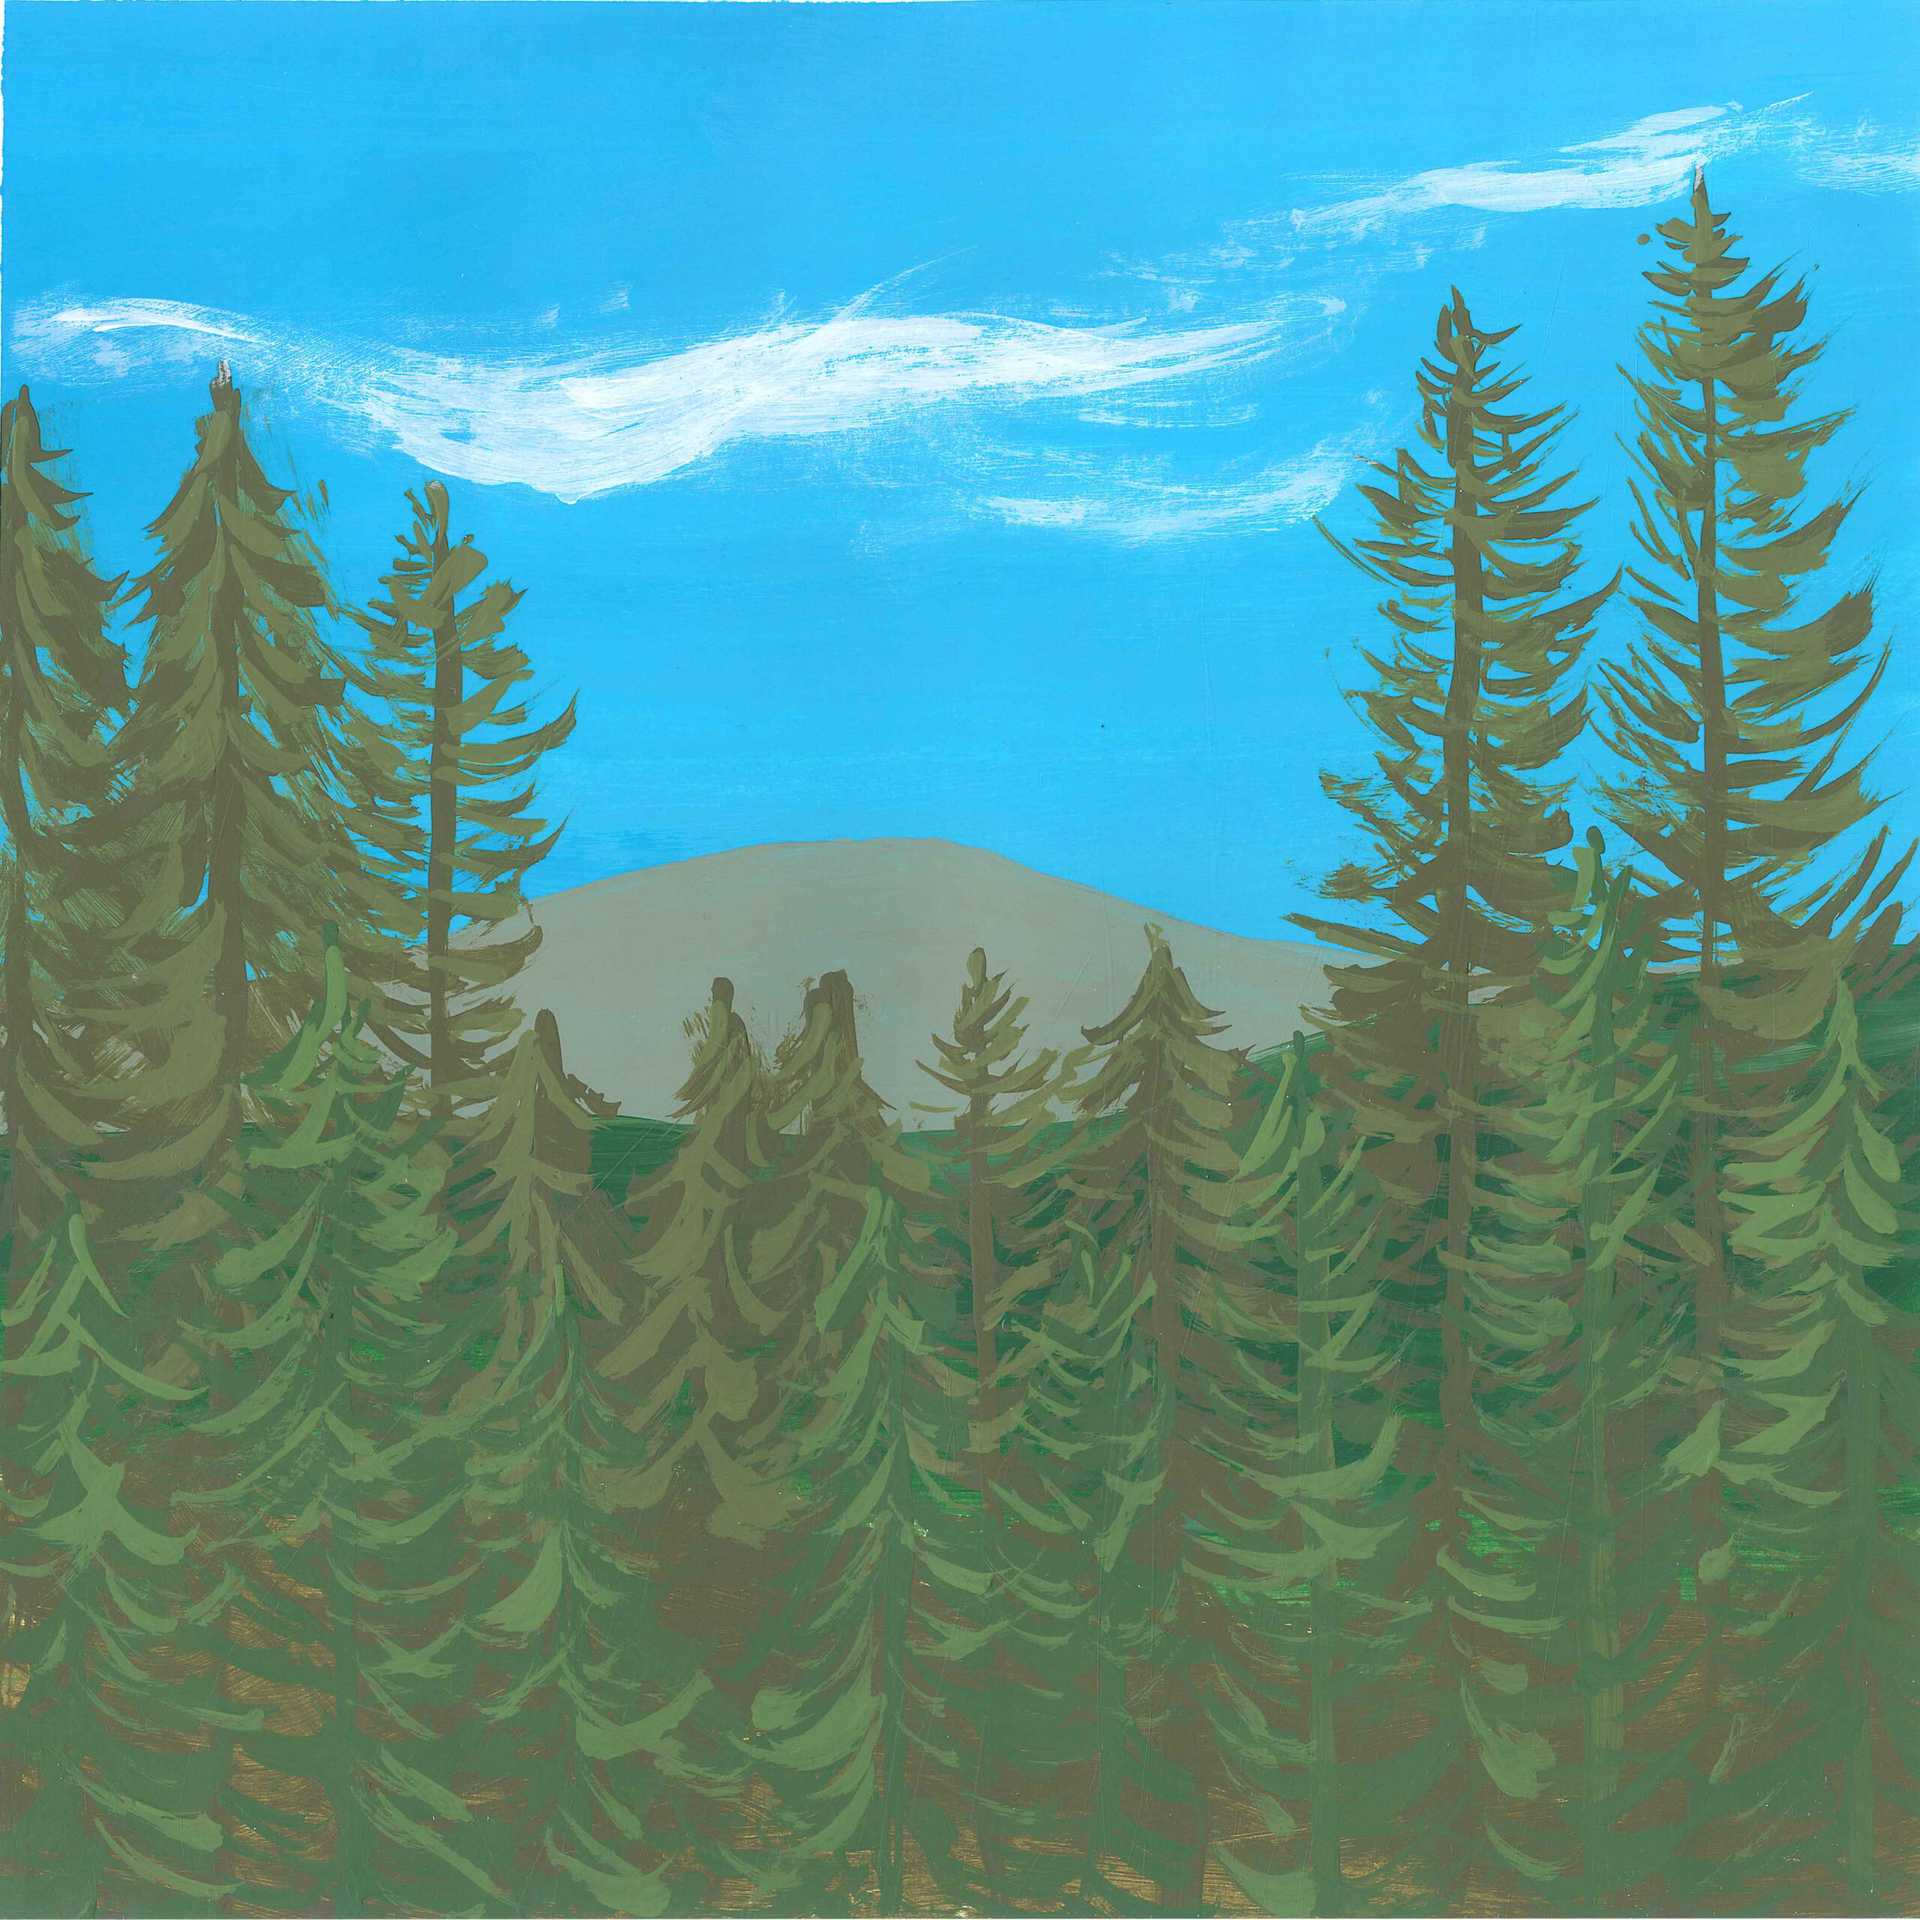 Wind in Pine Forest - earth.fm